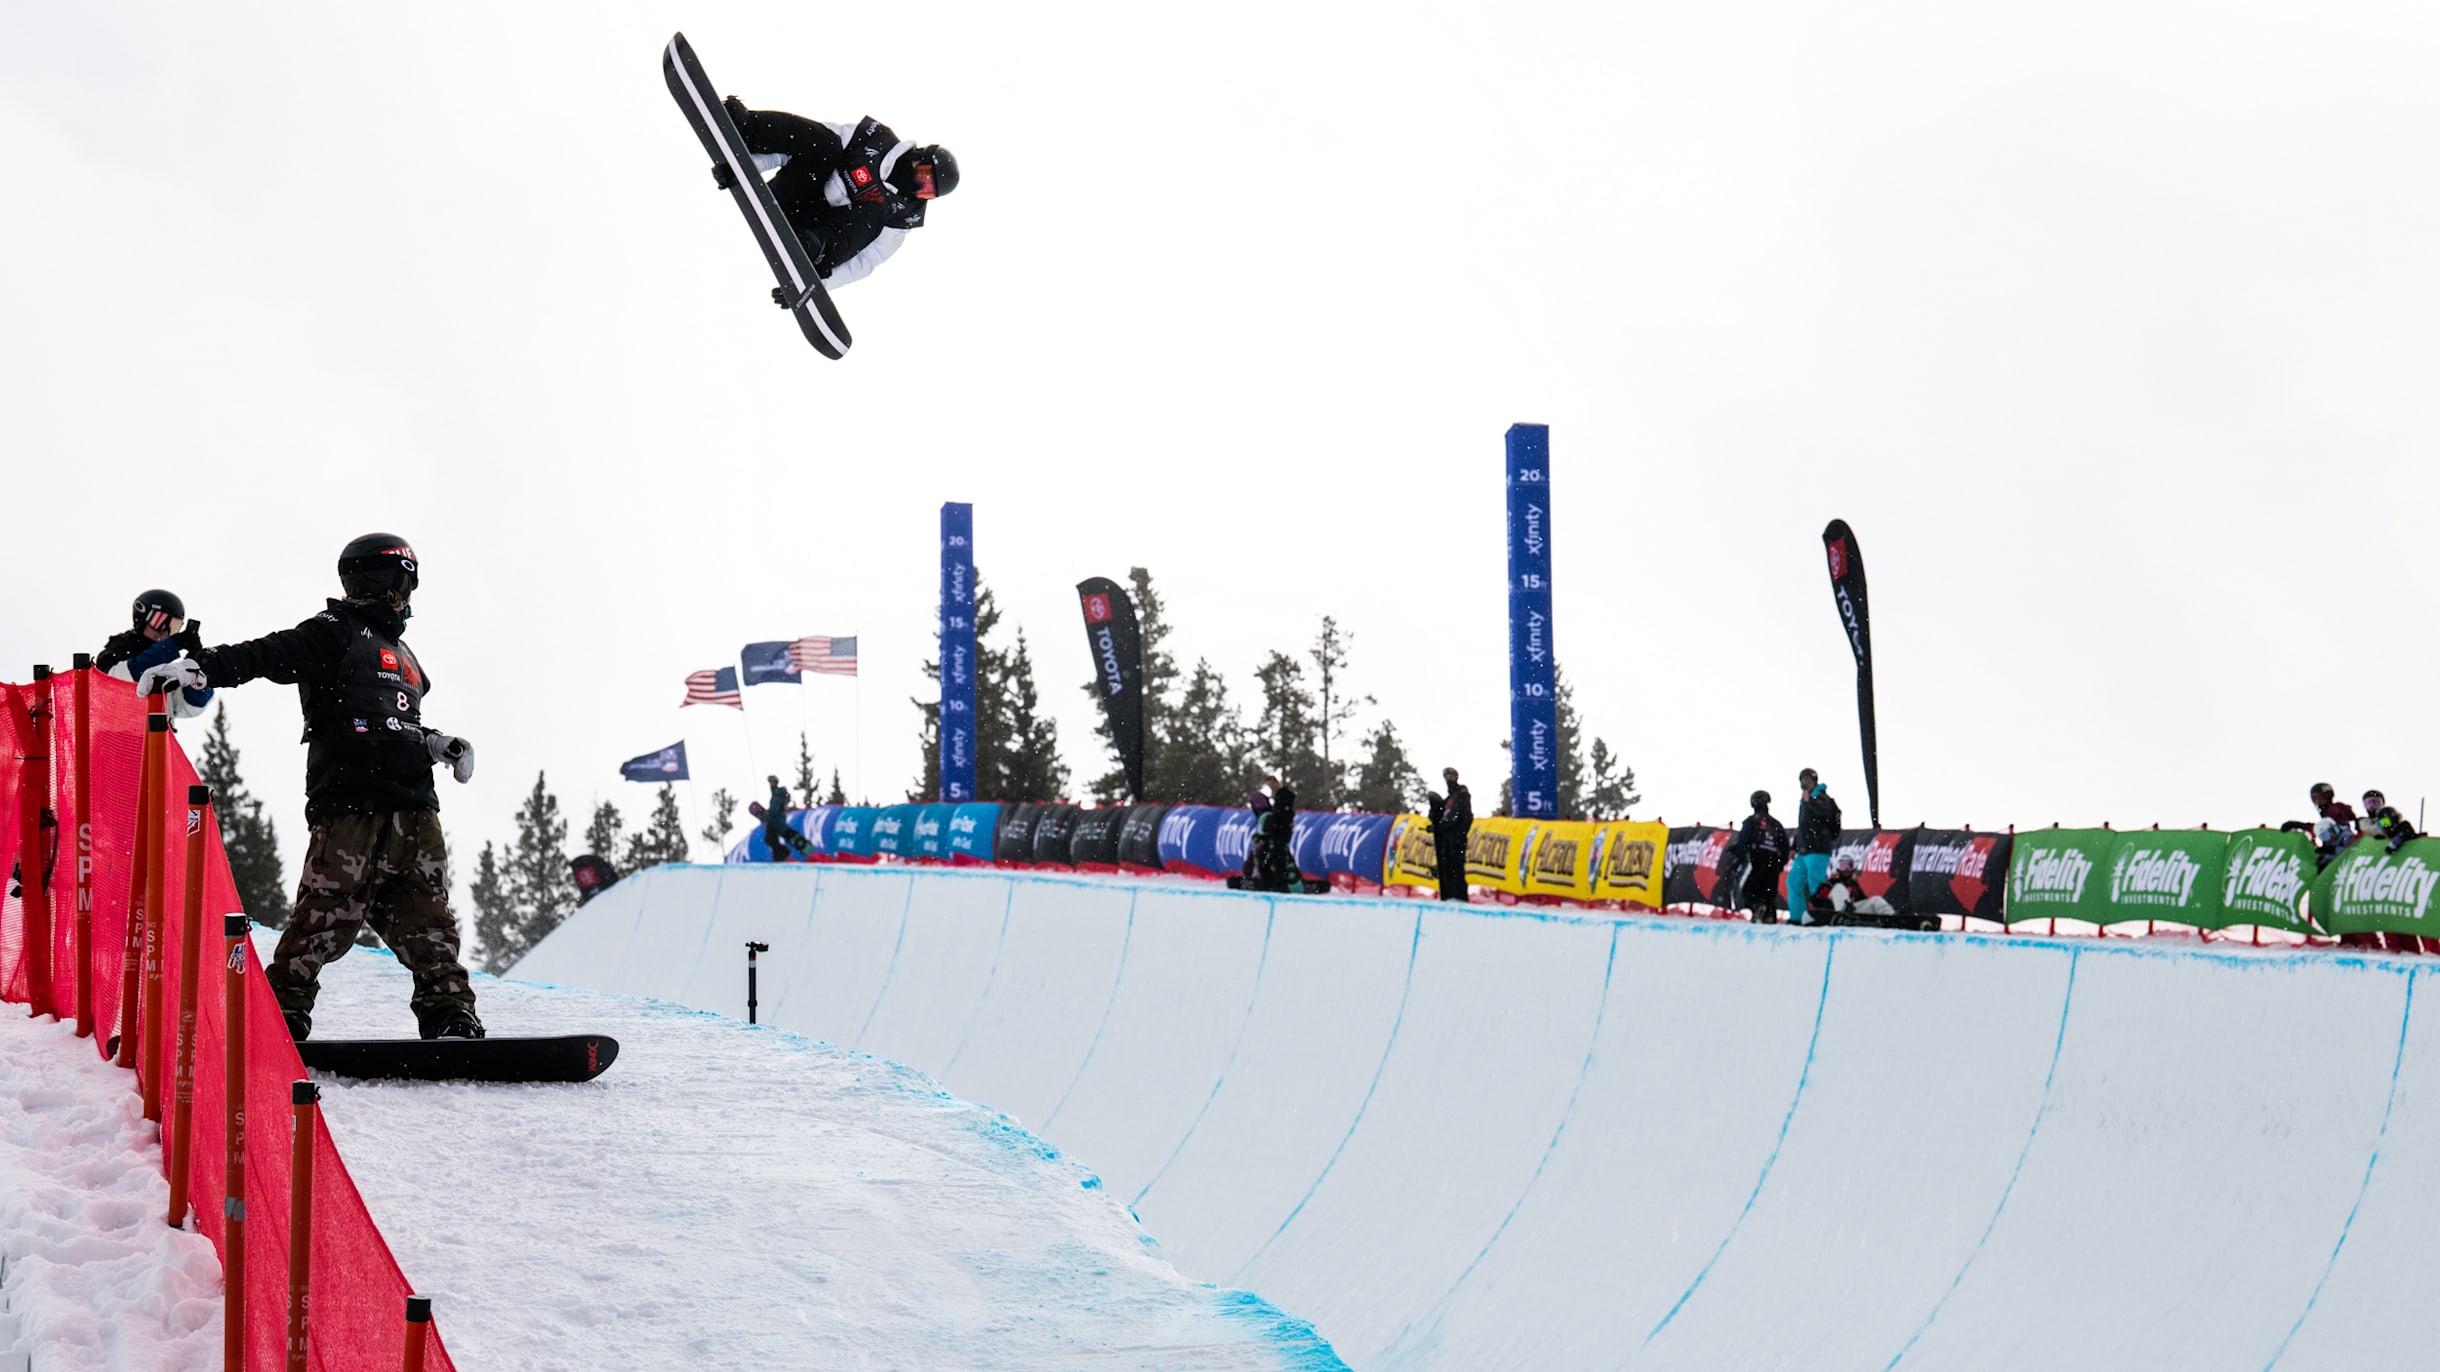 Shaun White snags place in Copper Mountain halfpipe finals